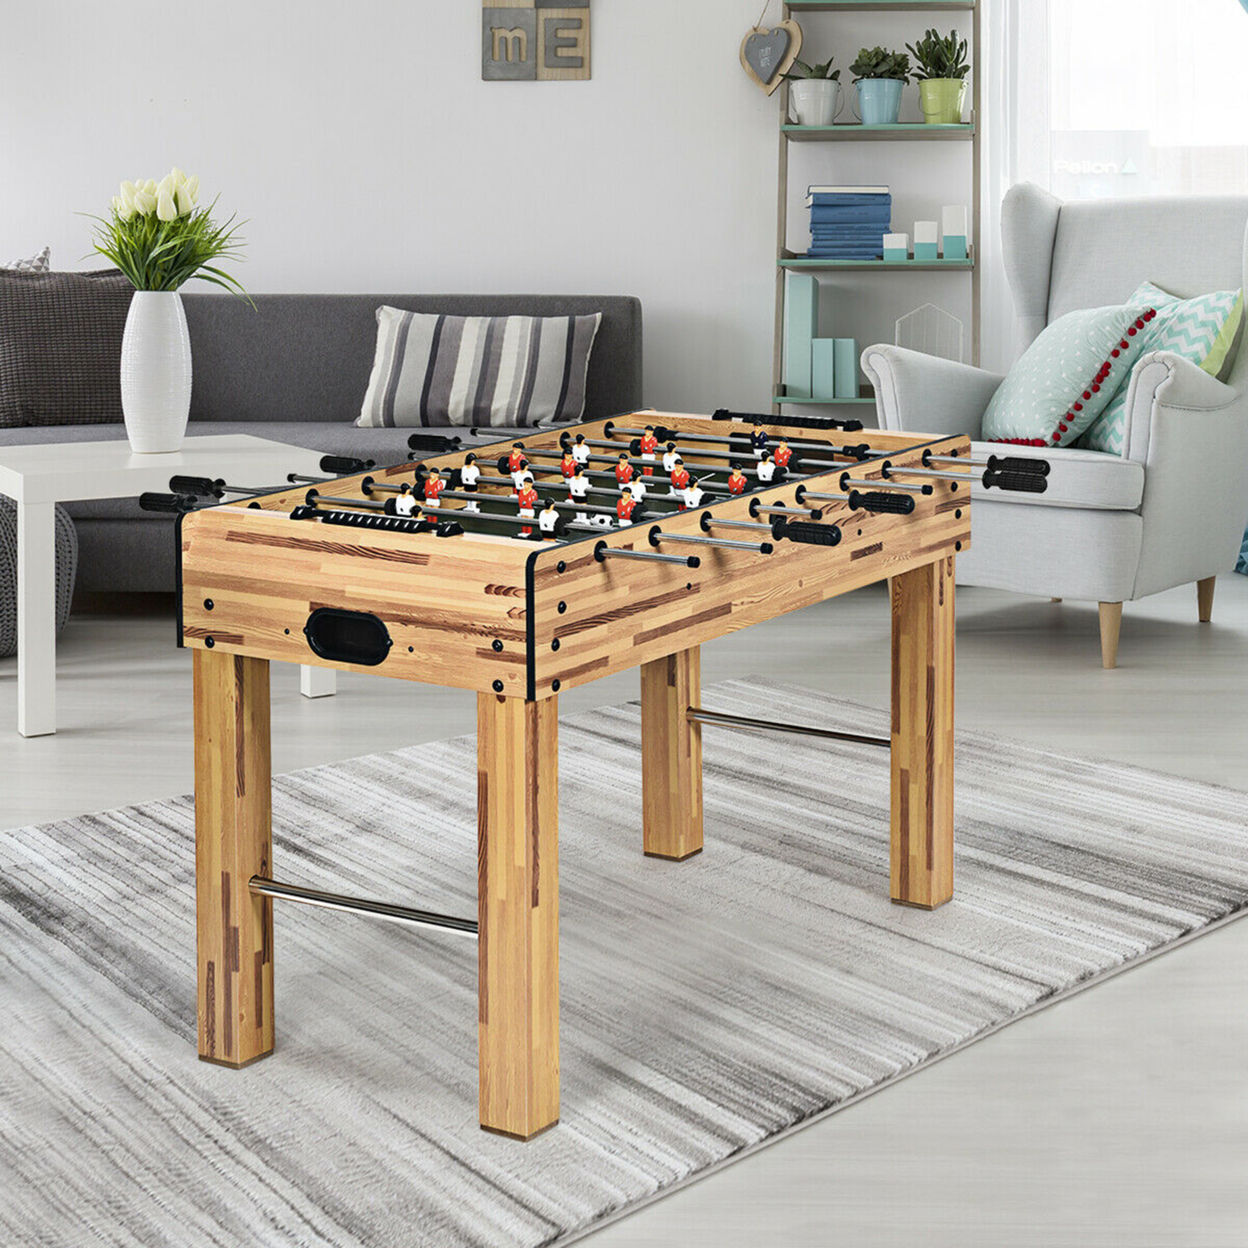 48'' Foosball Table Home Soccer Game Table Christmas Families Party Recreation